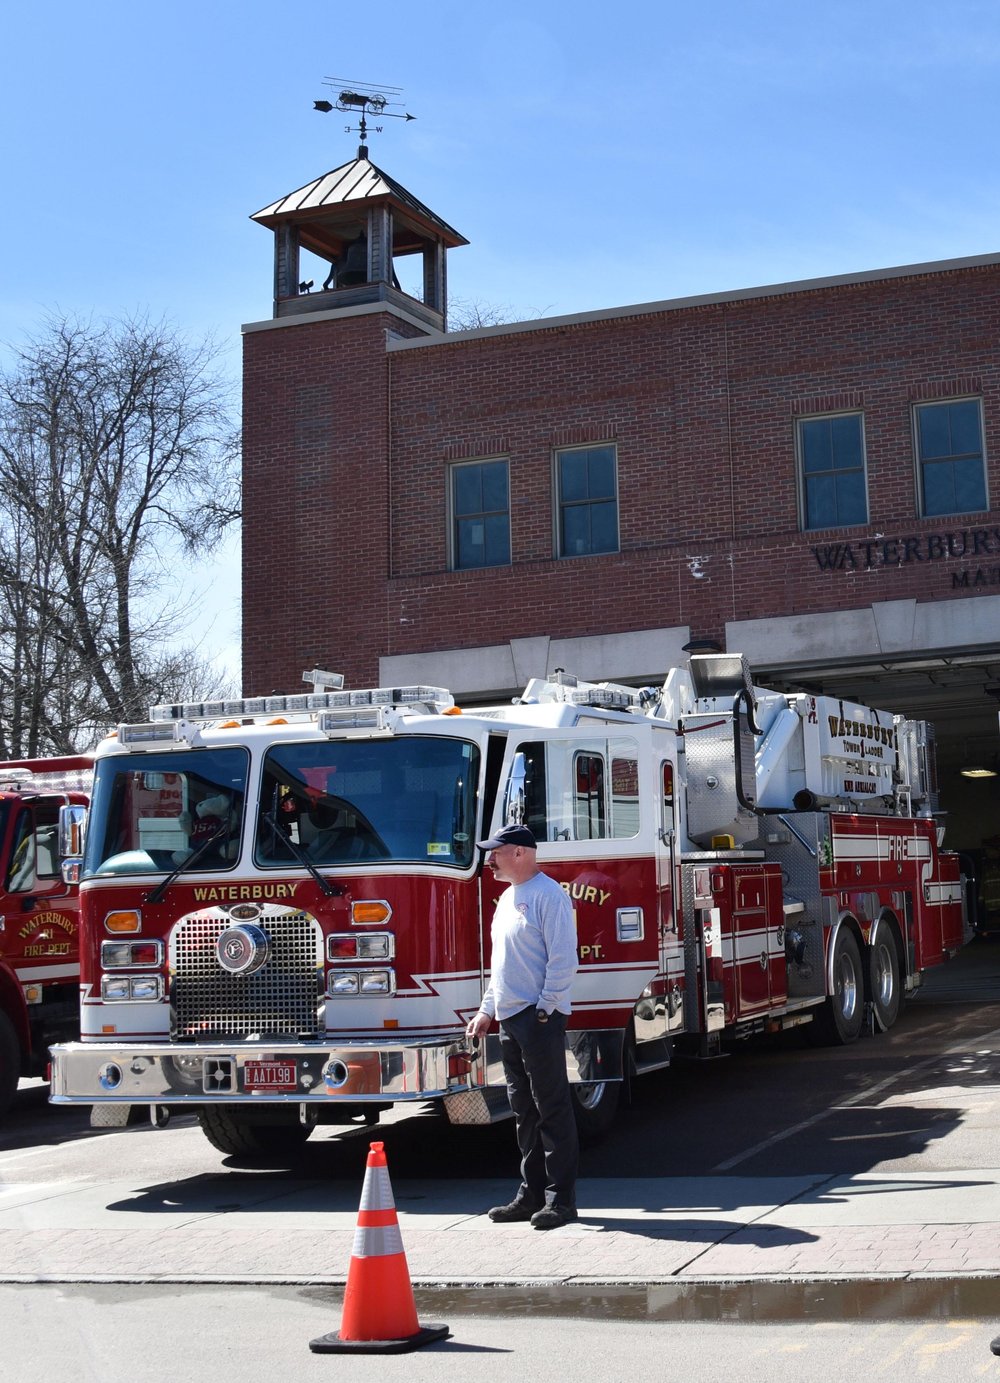   Waterbury Fire Chief Gary Dillon takes in the scene at the Main Street fire station. Photo by Gordon Miller  